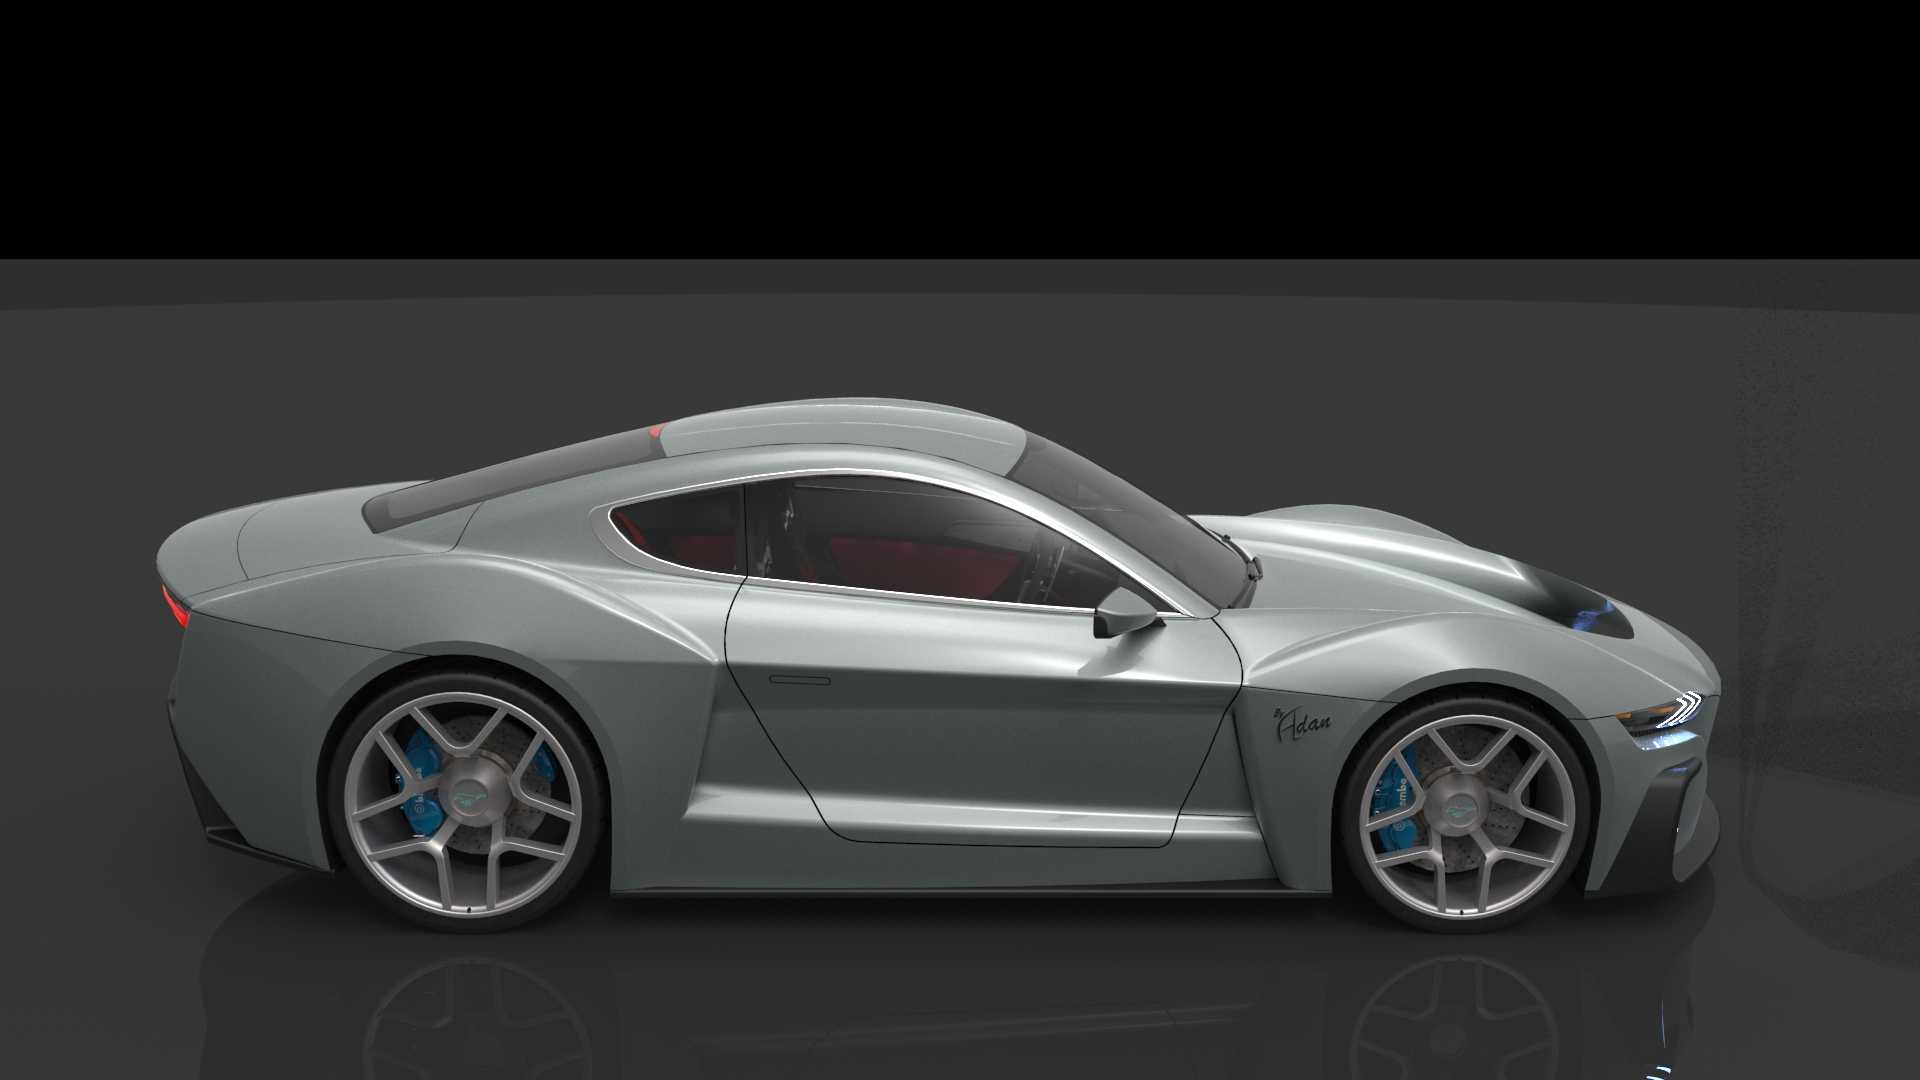 S650 Mustang S650 Mustang rendered by Sketch Monkey 1A02F4C8-A4AD-4B2F-A6B9-80FE5BE8DF54